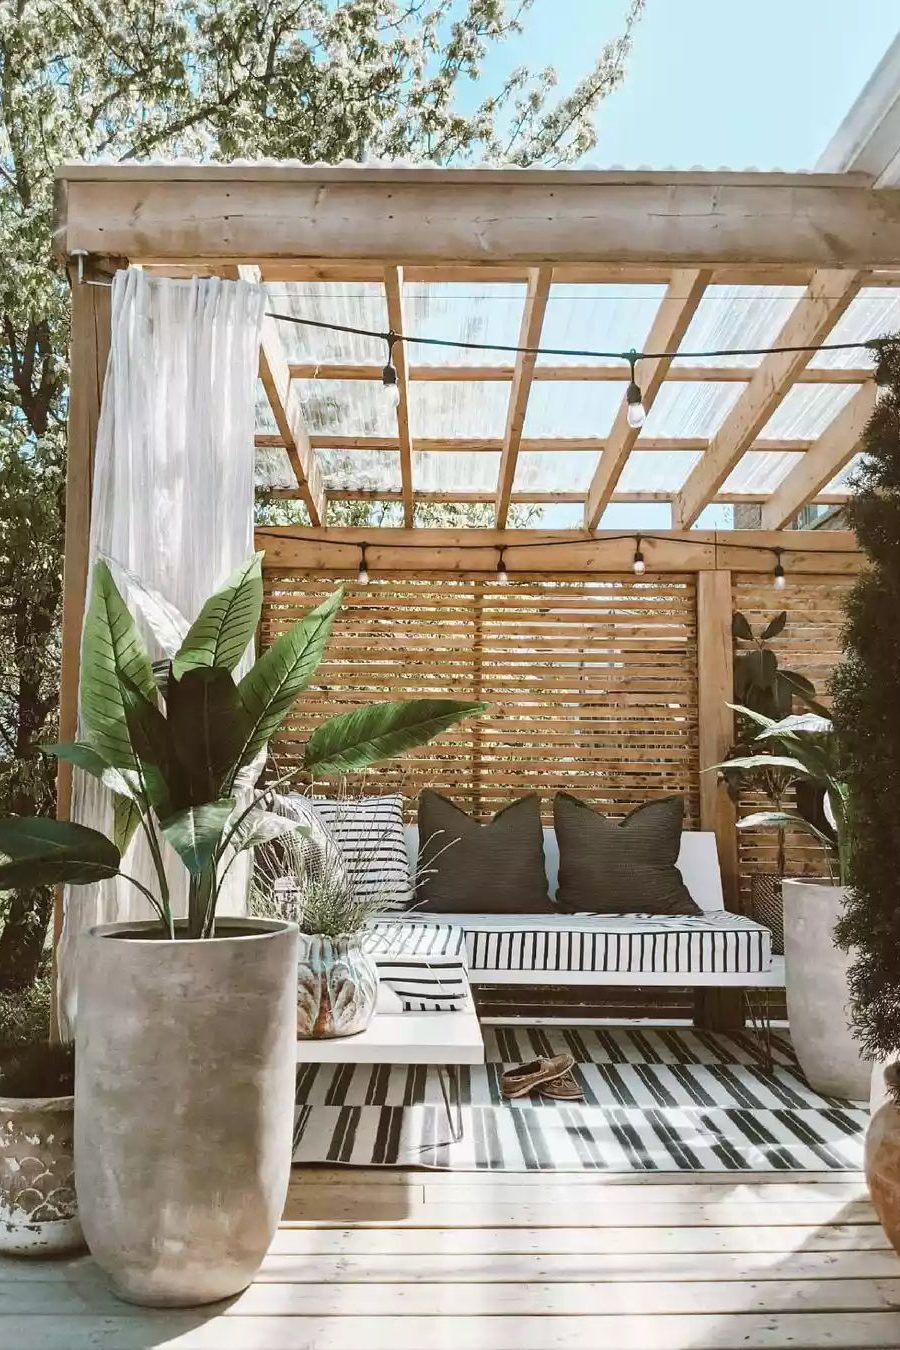 Transform Your Outdoor Space with Stunning Gazebo Patio Ideas